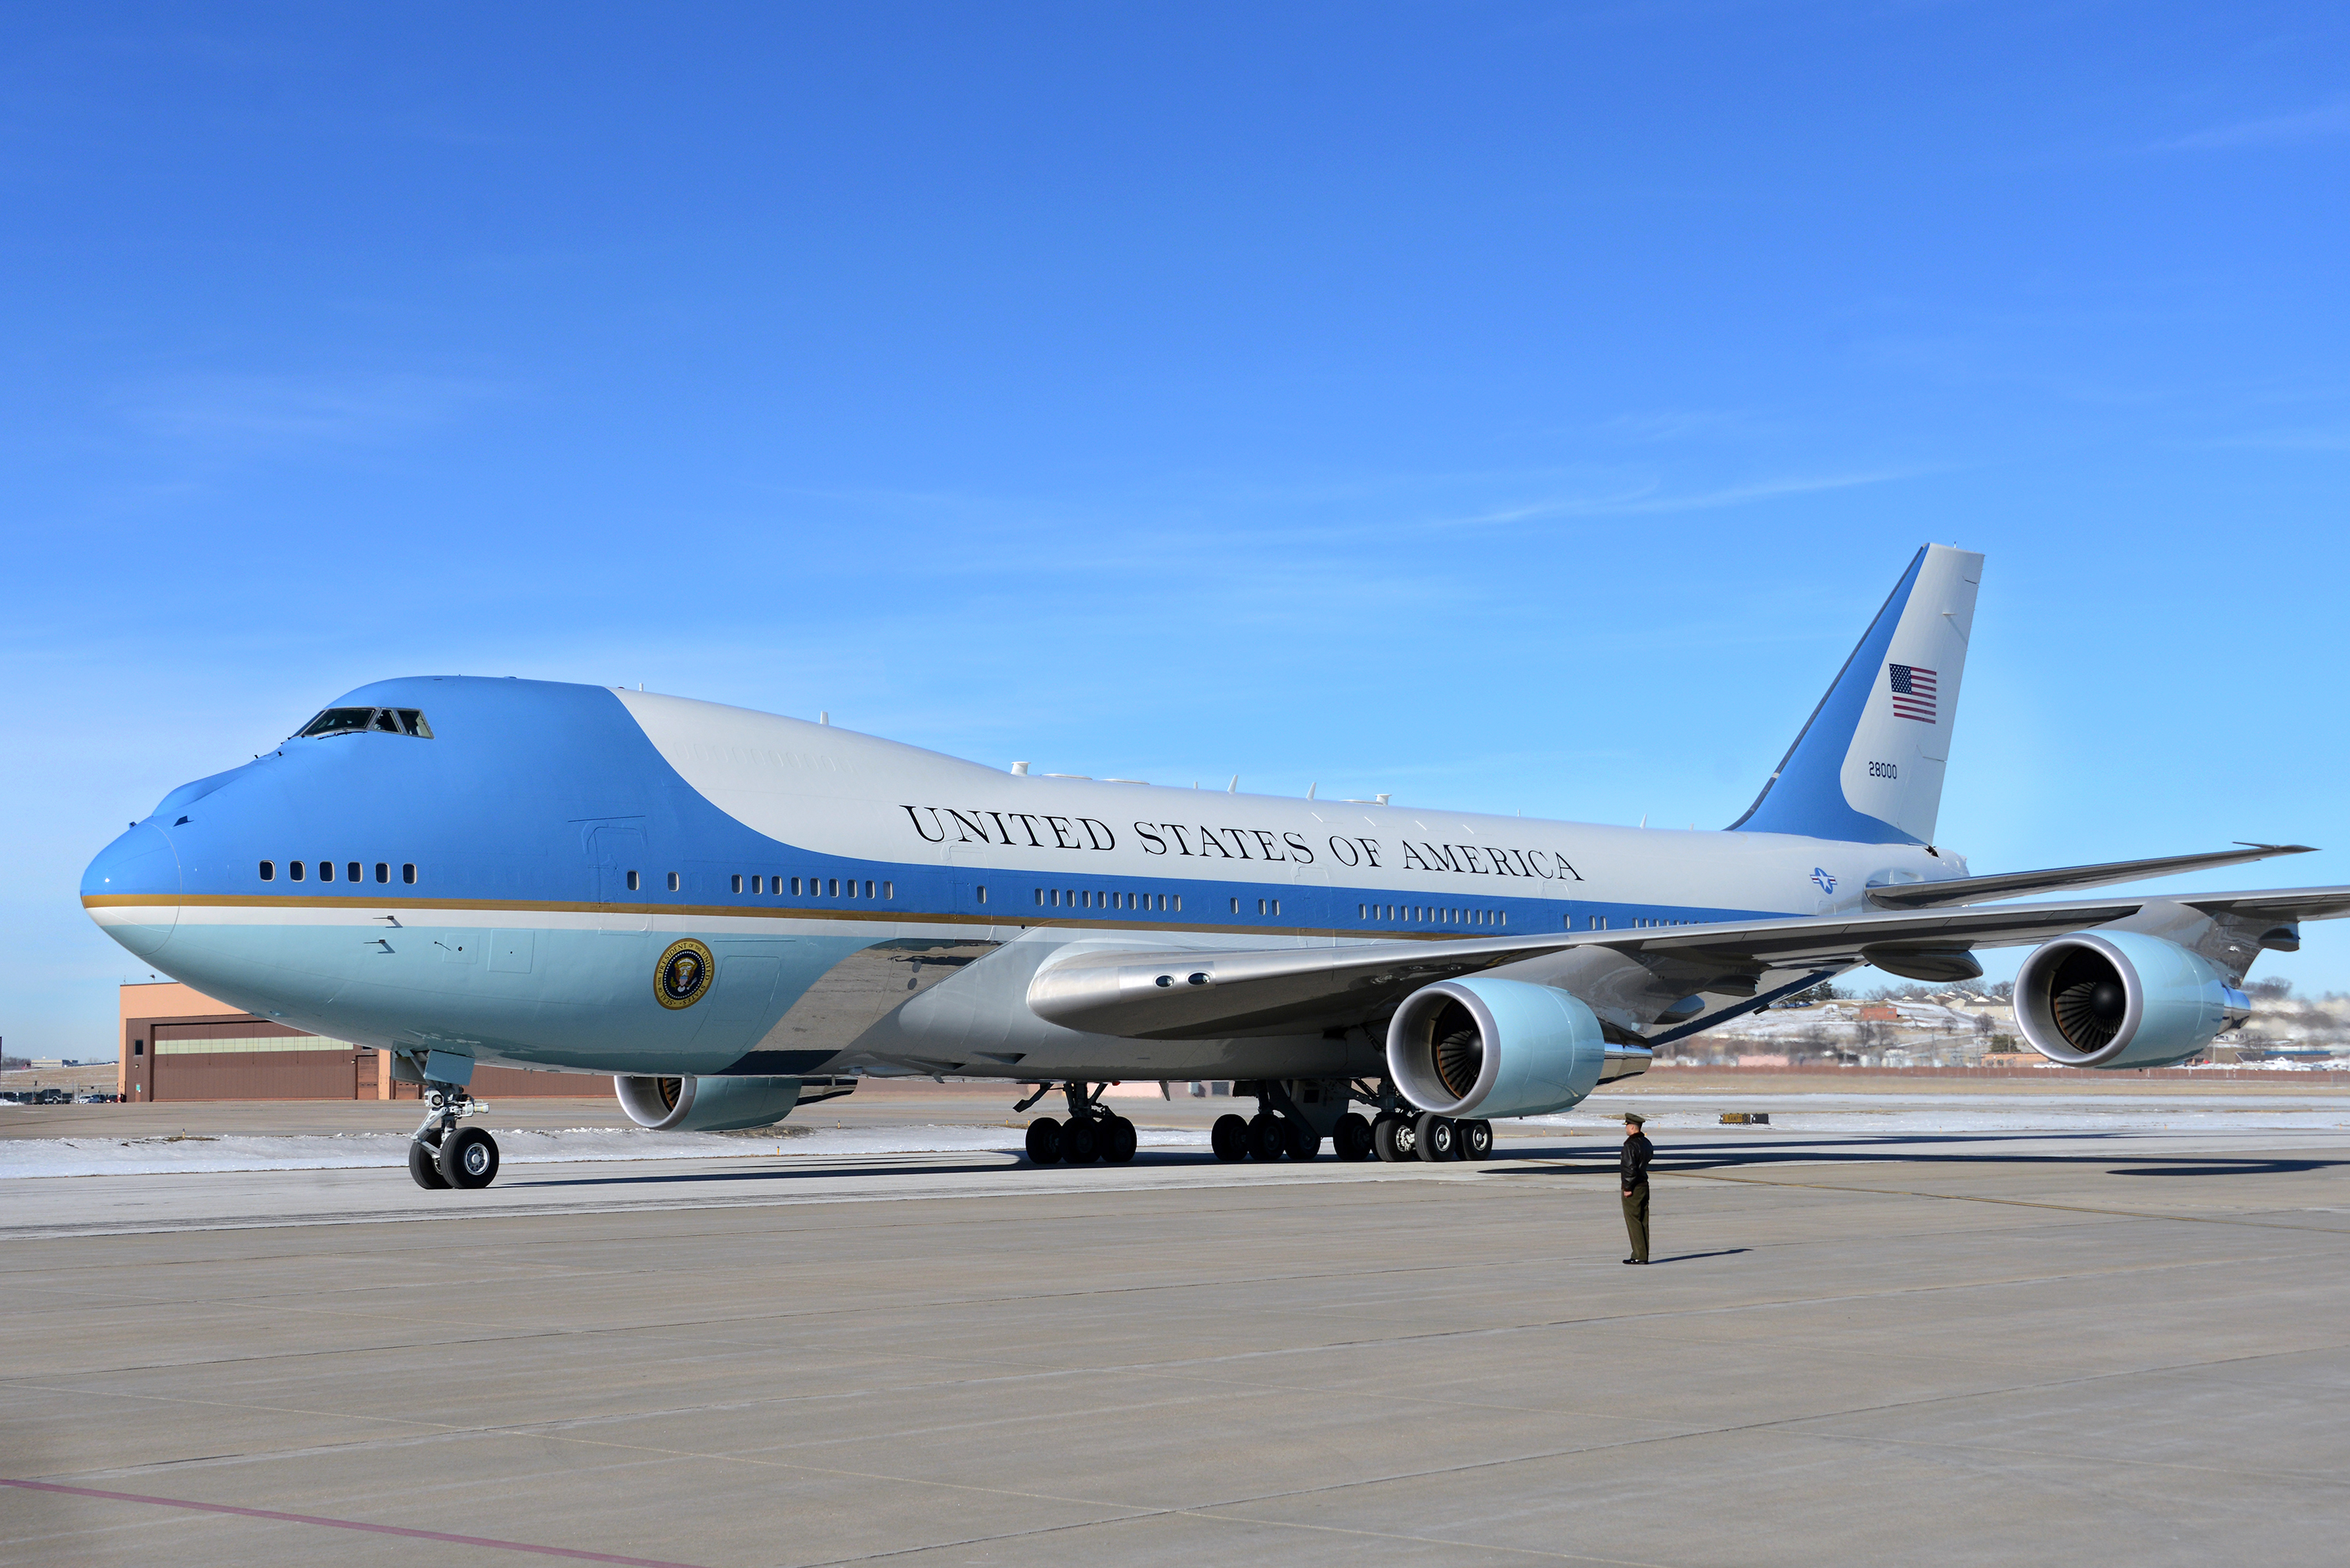 new air force one plane